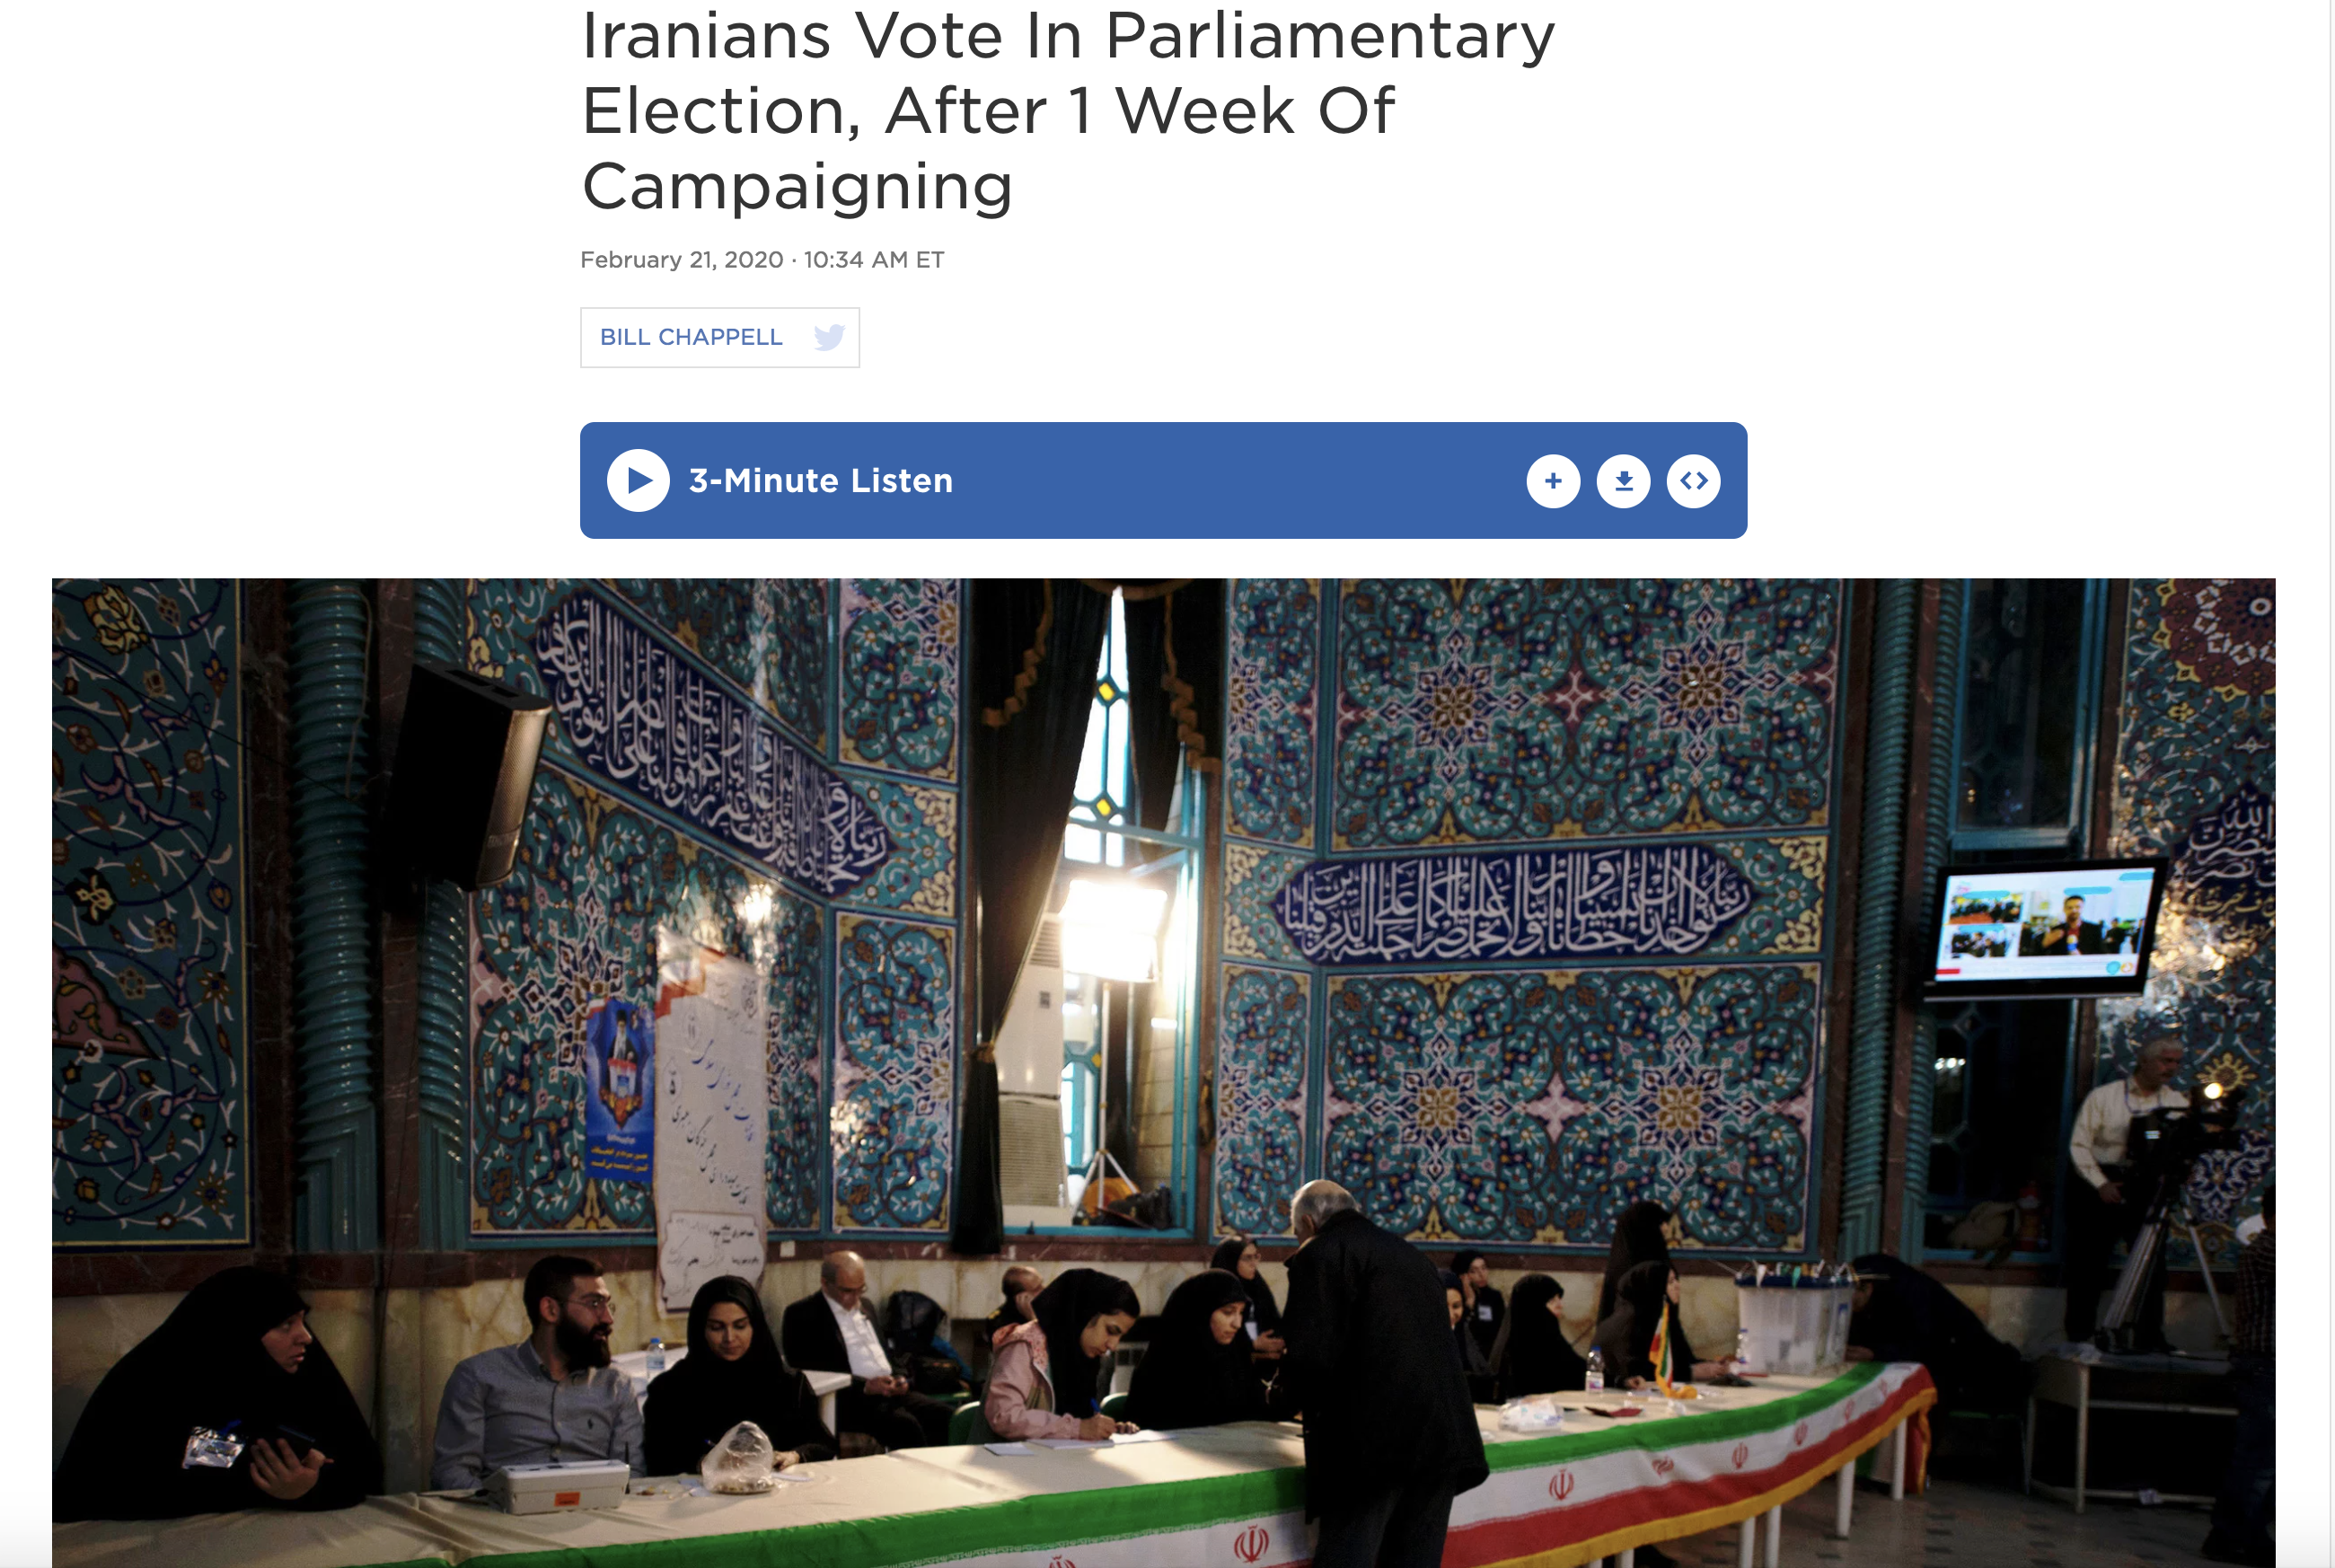 Thumbnail of Iranians Vote In Parliamentary Election, After 1 Week Of Campaigning